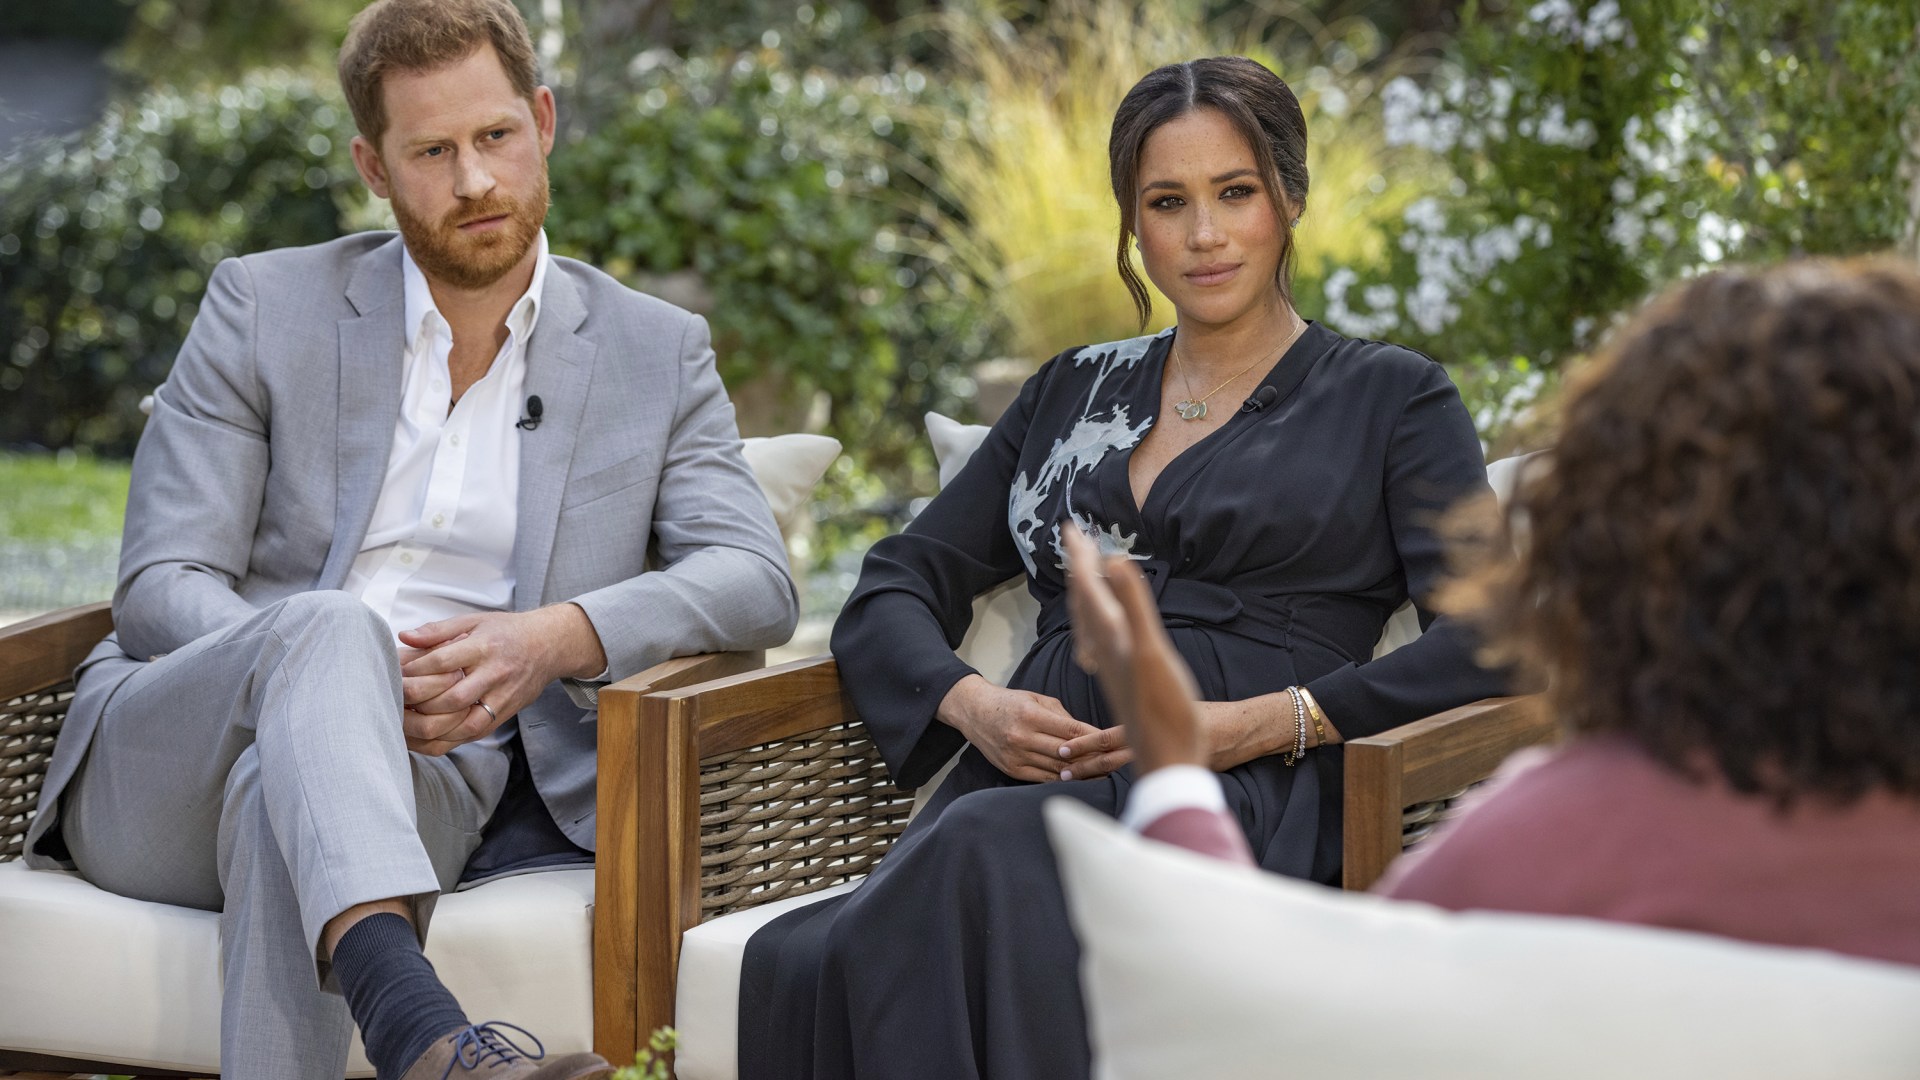 Meghan Markle & Harry ‘refuse to take sole responsibility for William & Kate rift’ despite taking swipes at royals [Video]